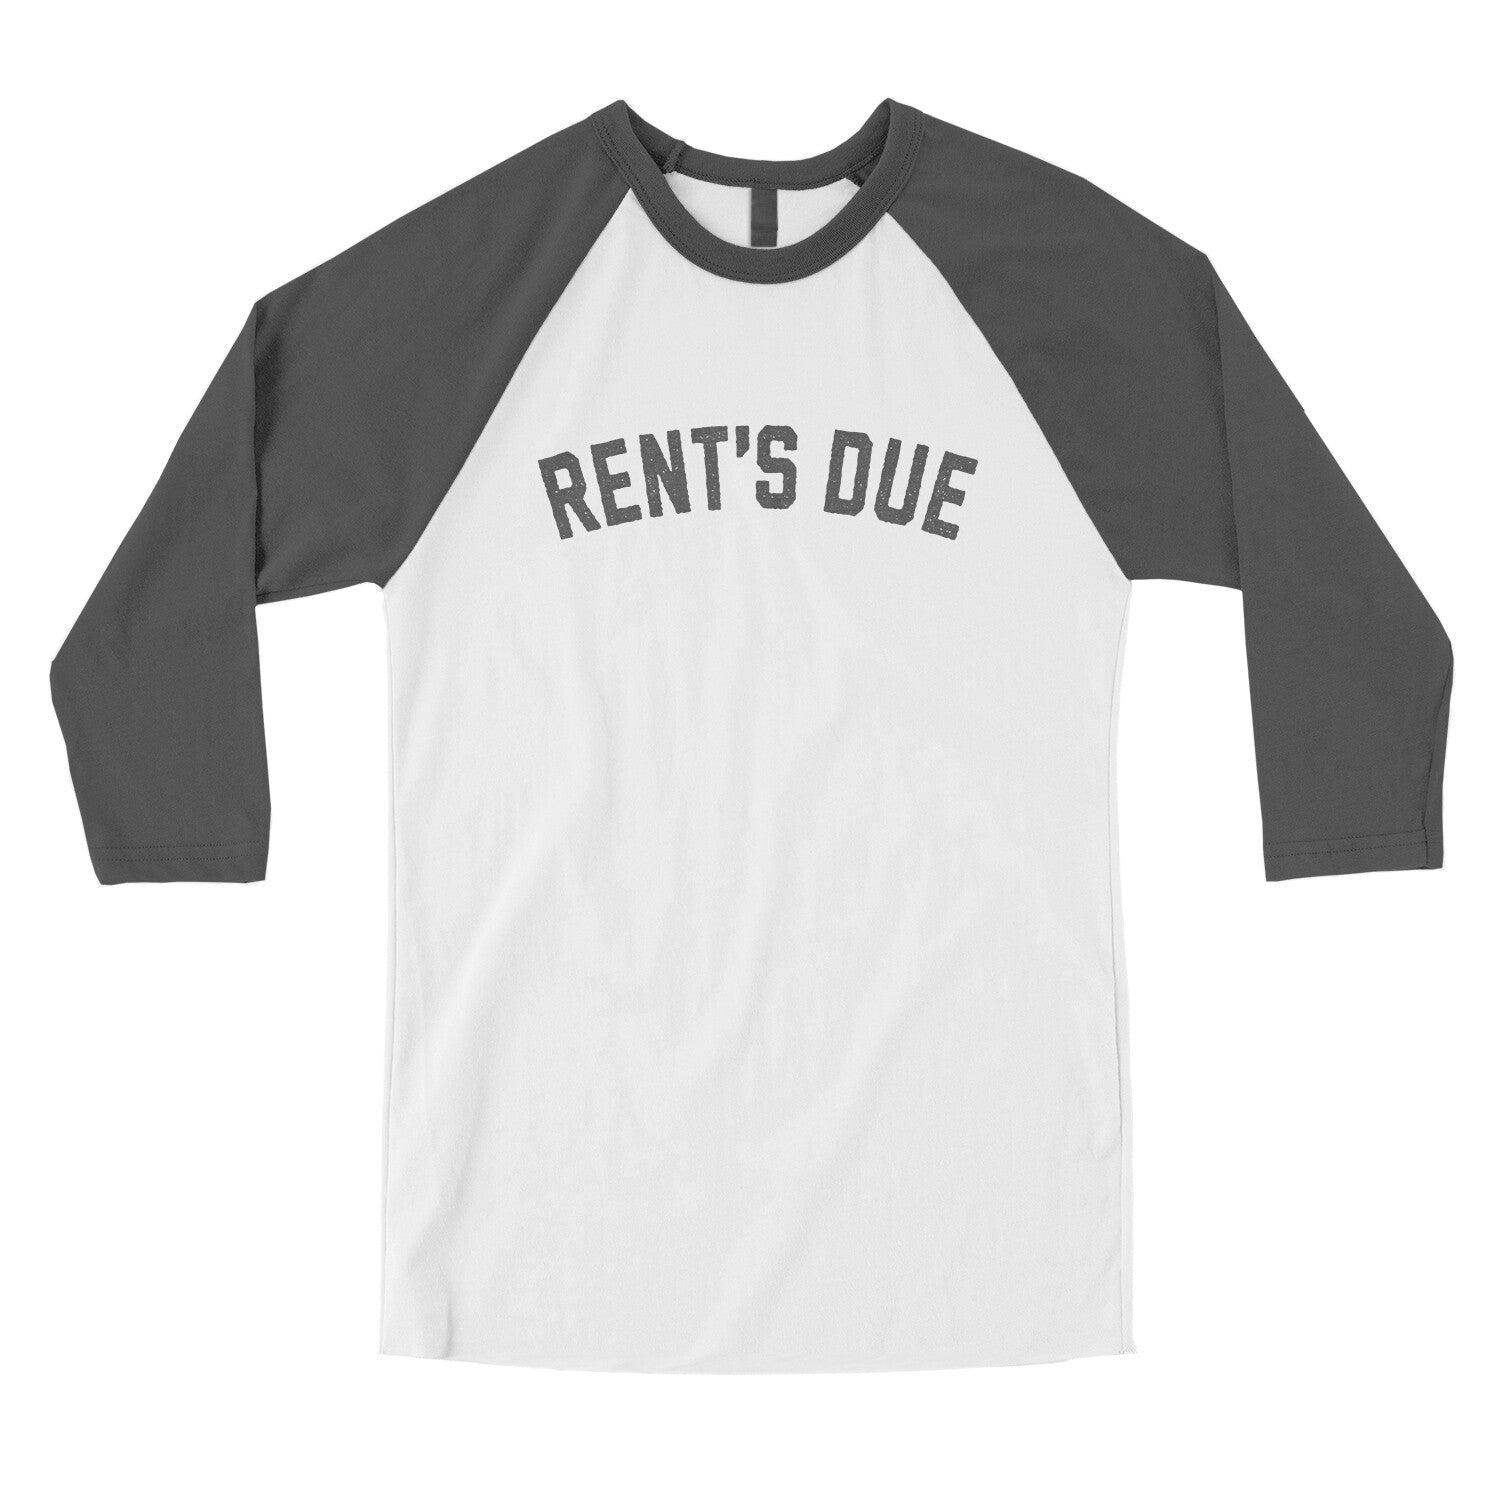 Rent's Due in White with Asphalt Color